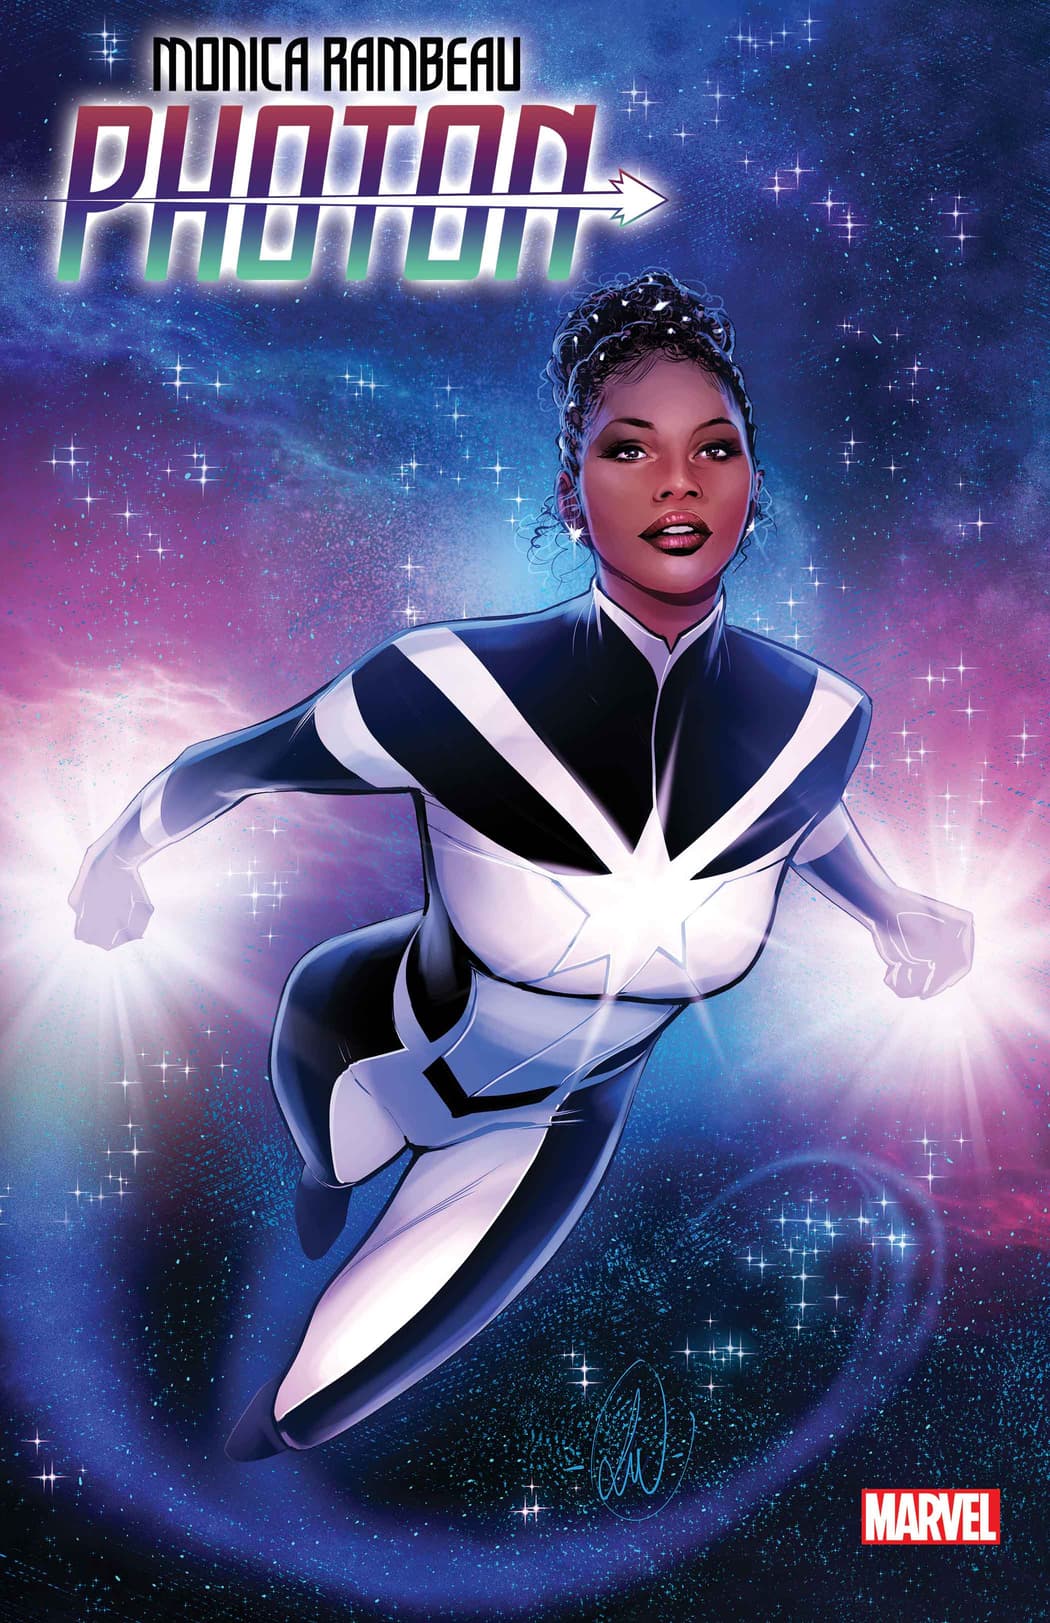 Monica Rambeau as Photon: an African American woman wearing a black and white costume flies through space.